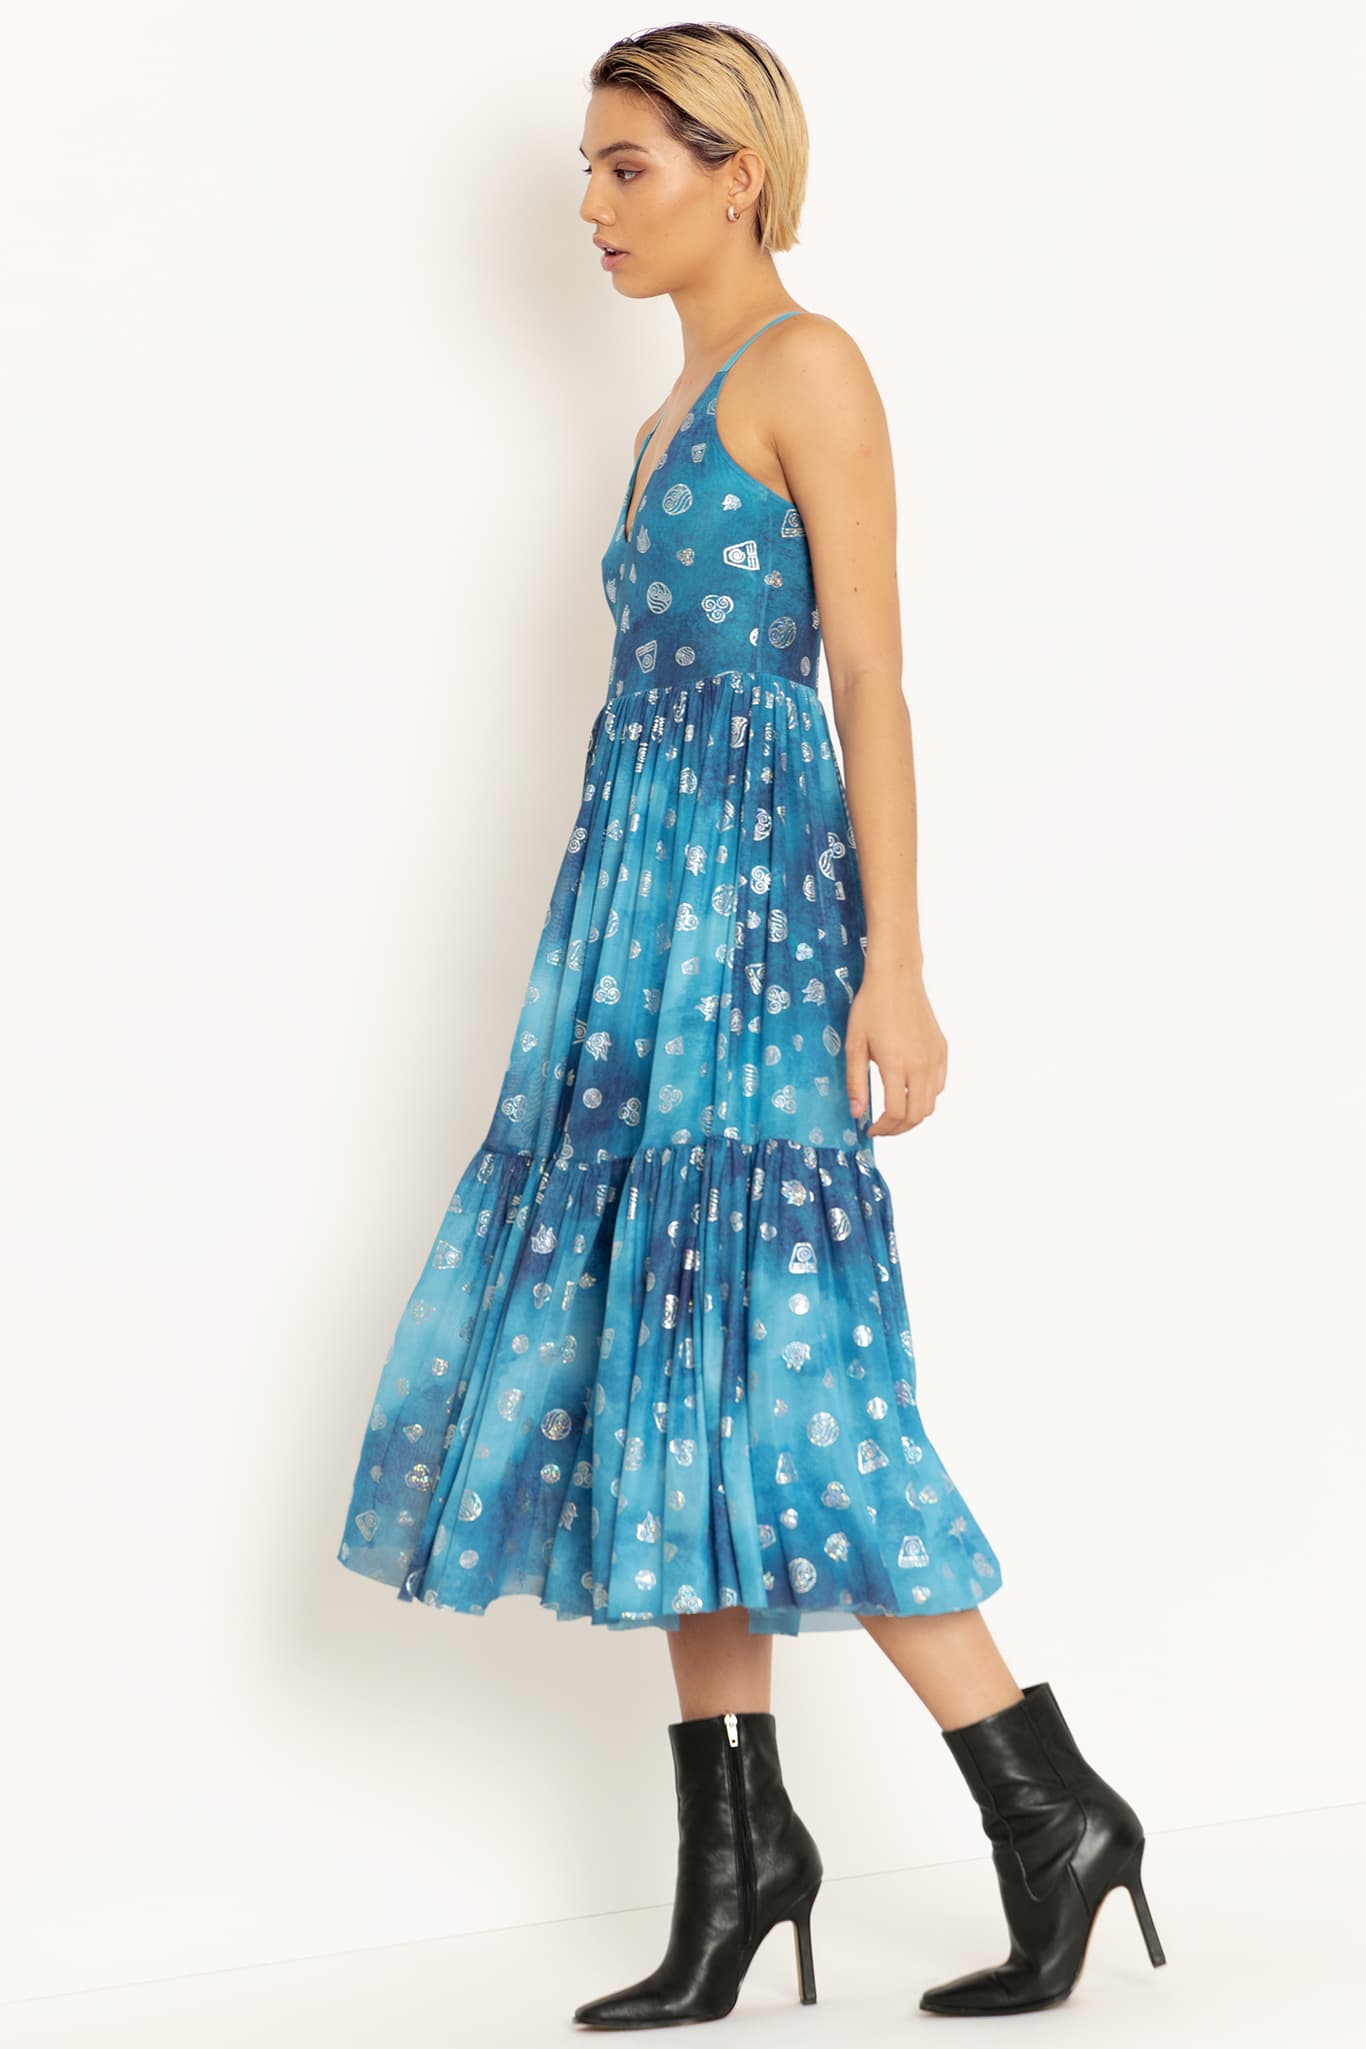 Earth Air Fire Water Sheer Midaxi Dress - Limited